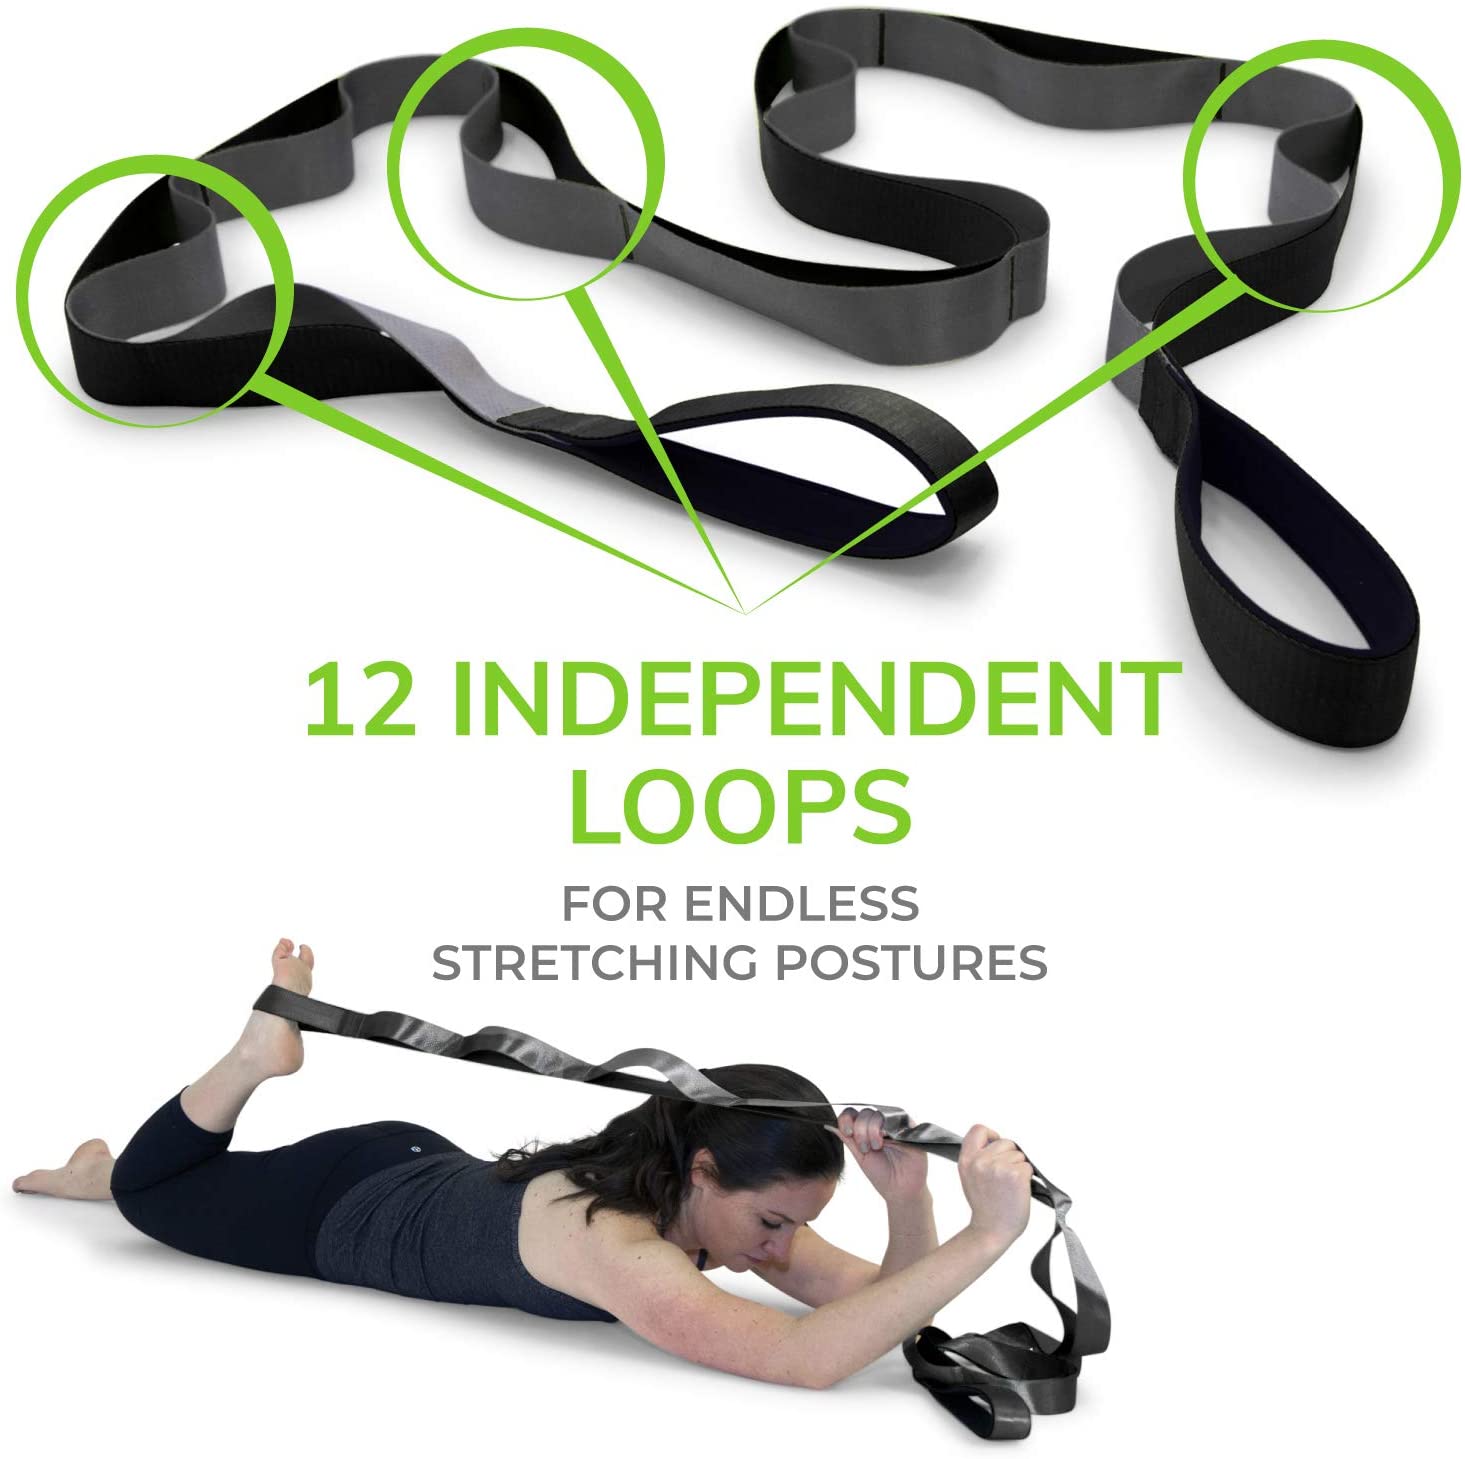 Gradient Fitness Stretching Strap for Physical Therapy, 12 Multi-Loop Stretch  Strap 1.5 W x 8' L, Neoprene Handles, Physical Therapy Equipment, Yoga  Straps for Stretching, Leg Stretcher Green/Grey